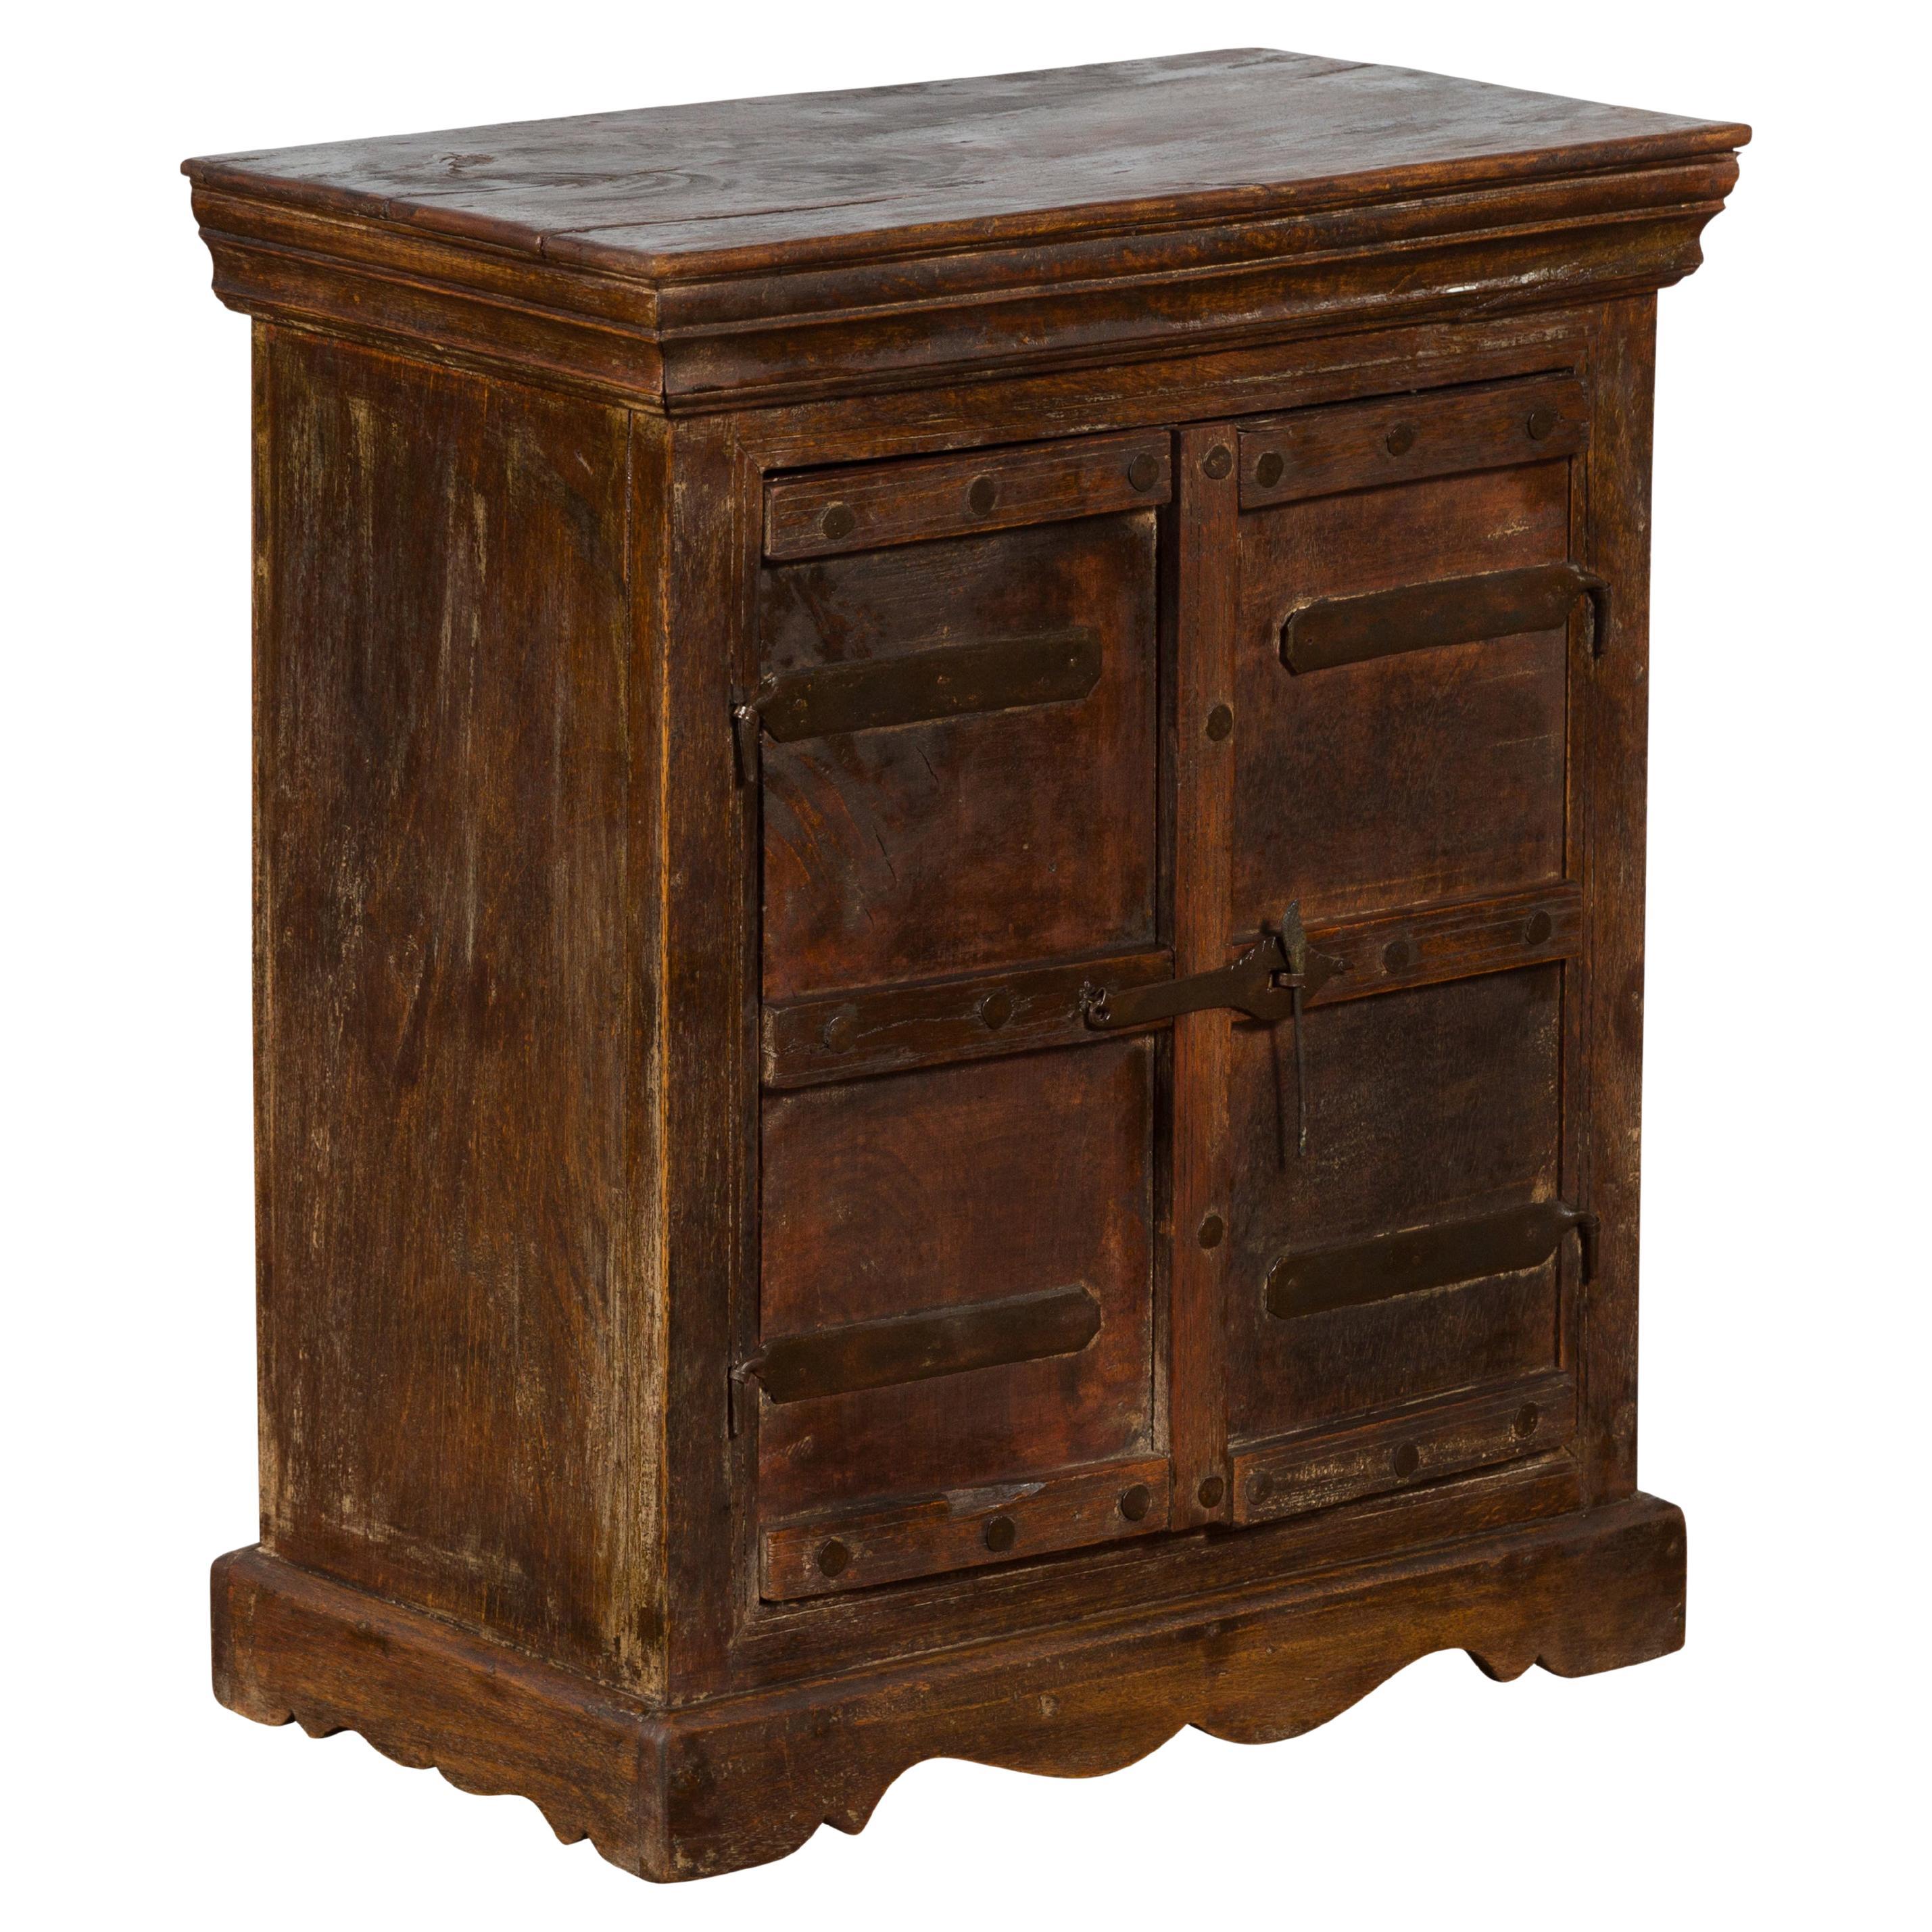 Rustic Indian Vintage Sheesham Small Cabinet with Iron Hardware Dark Patina